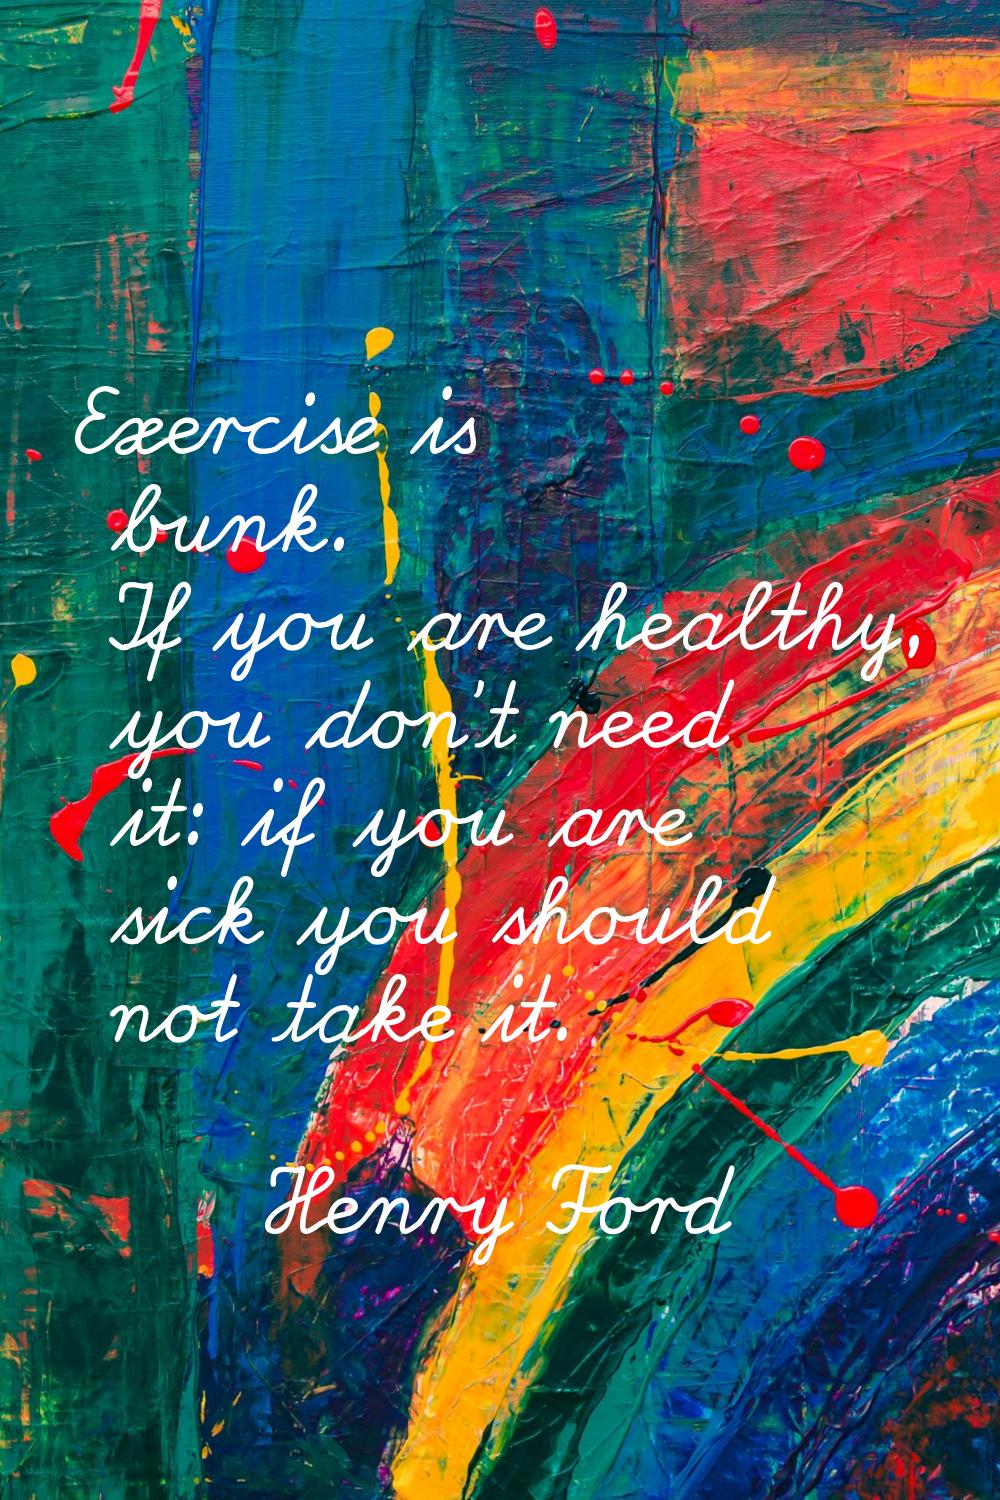 Exercise is bunk. If you are healthy, you don't need it: if you are sick you should not take it.